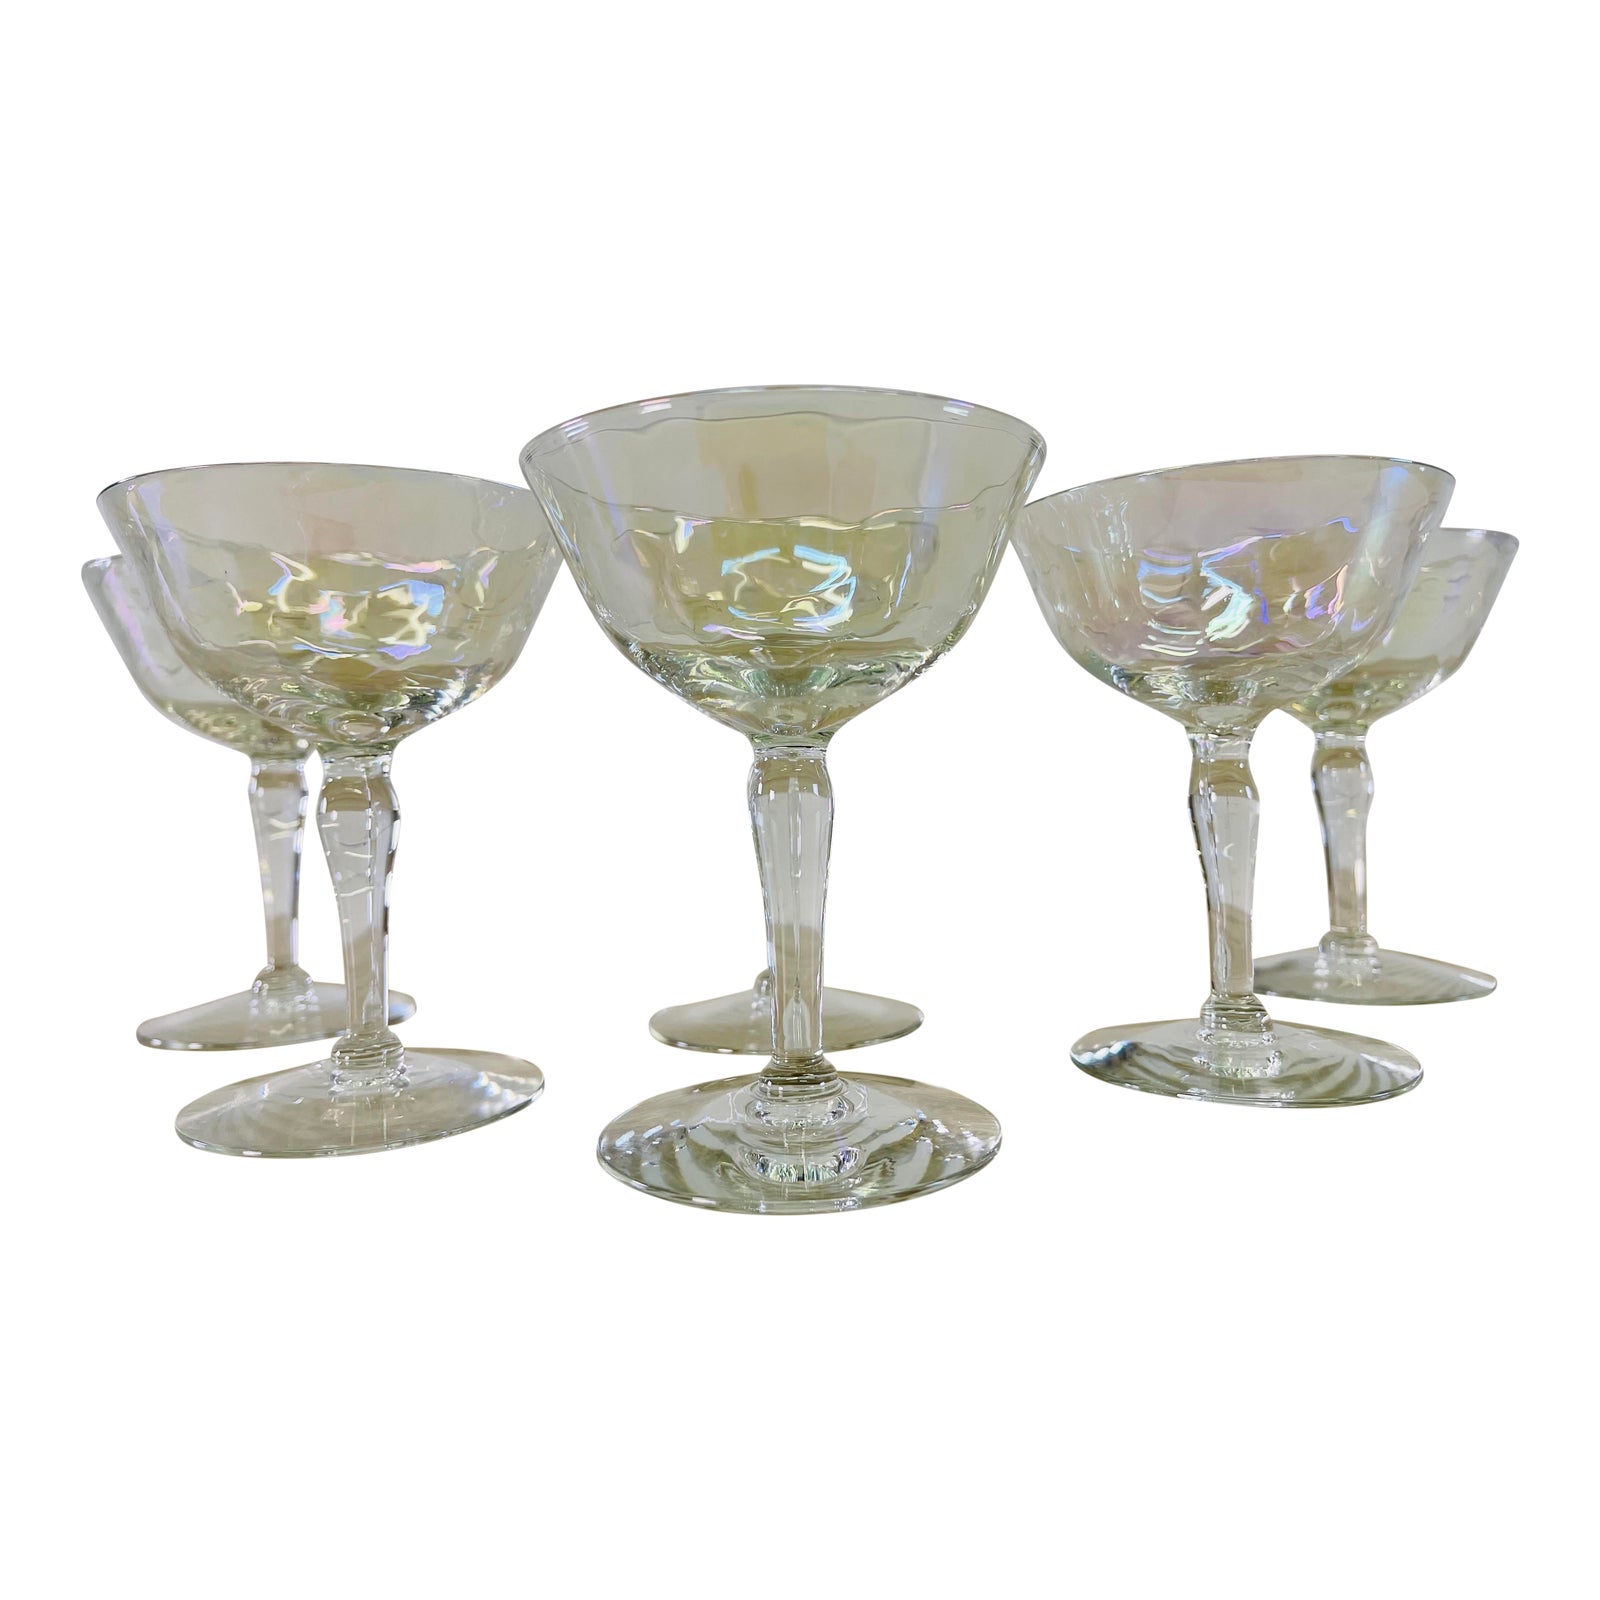 1960s Iridescent Glass Coupes, Set of 6~P77643633